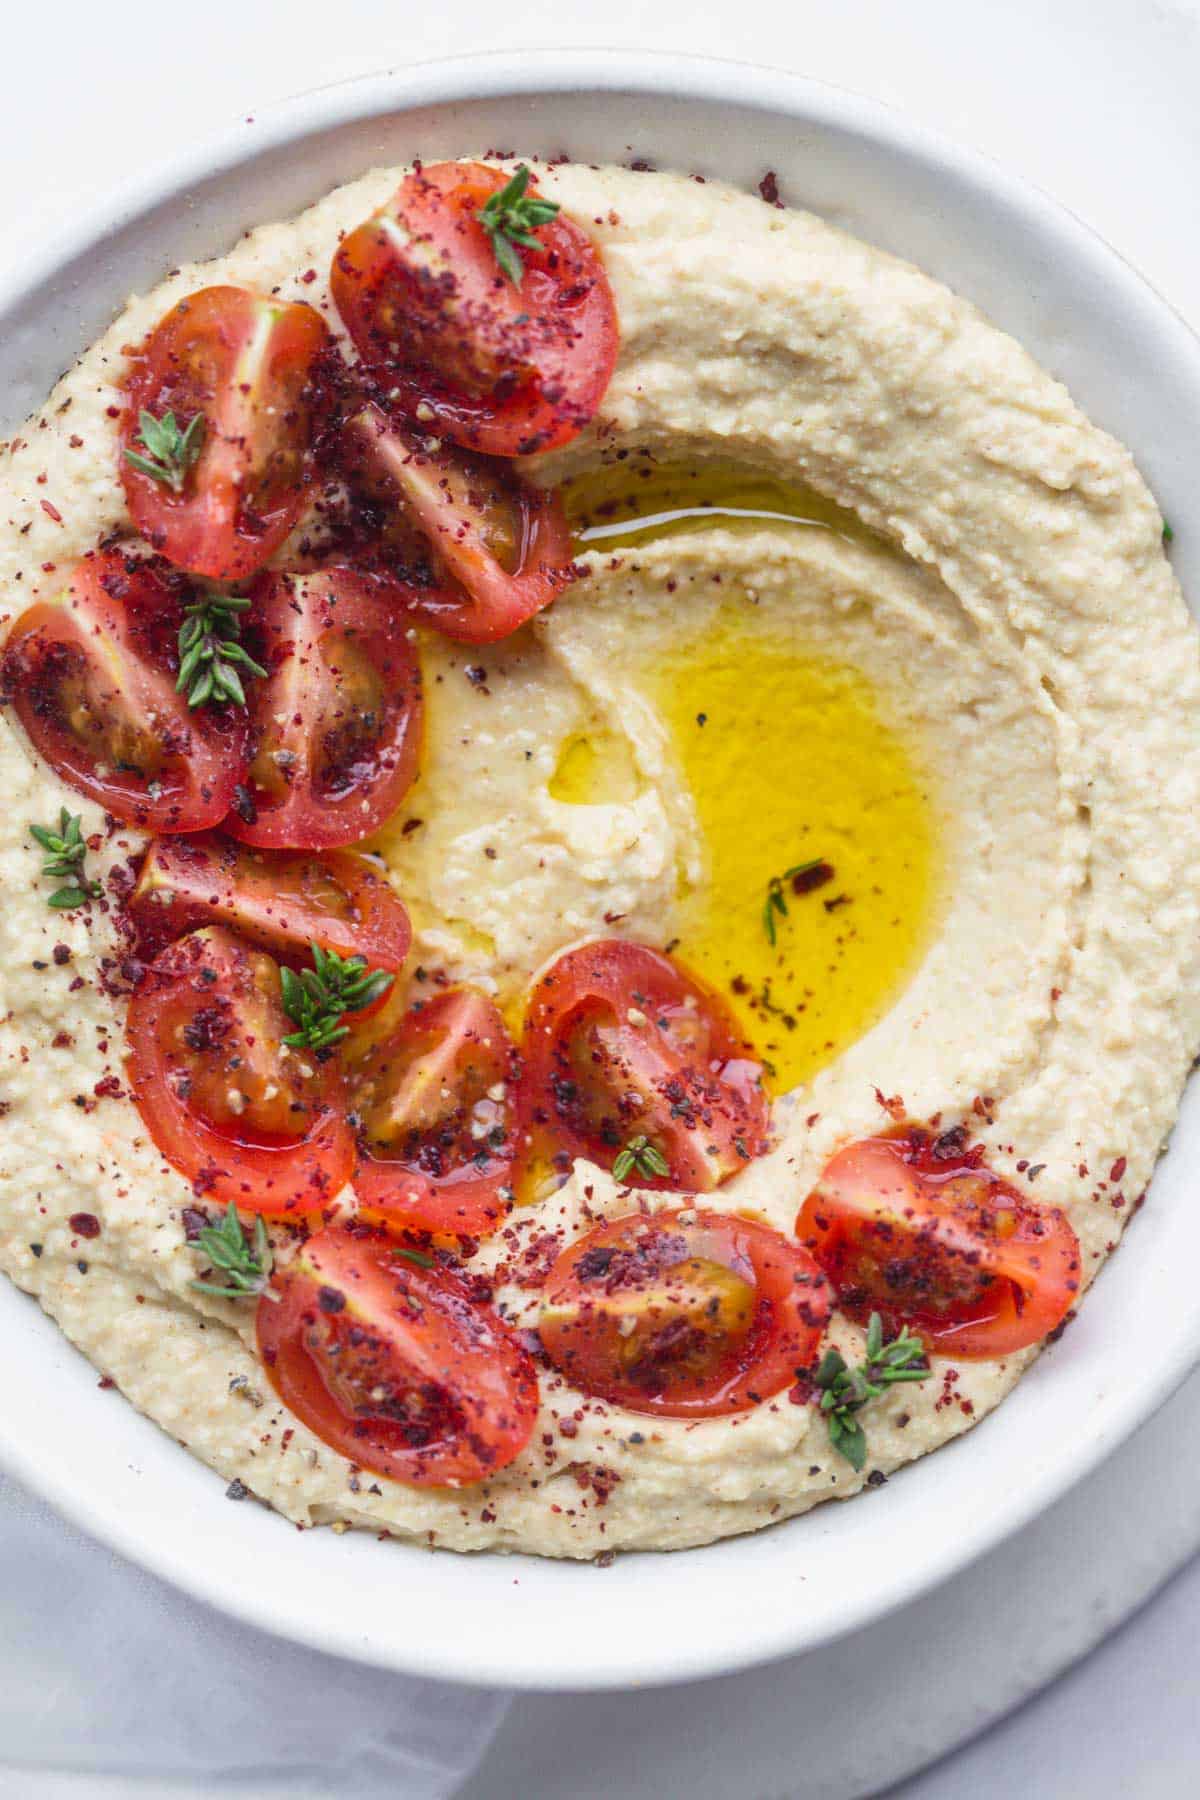 Hummus decorated with cherry tomatoes